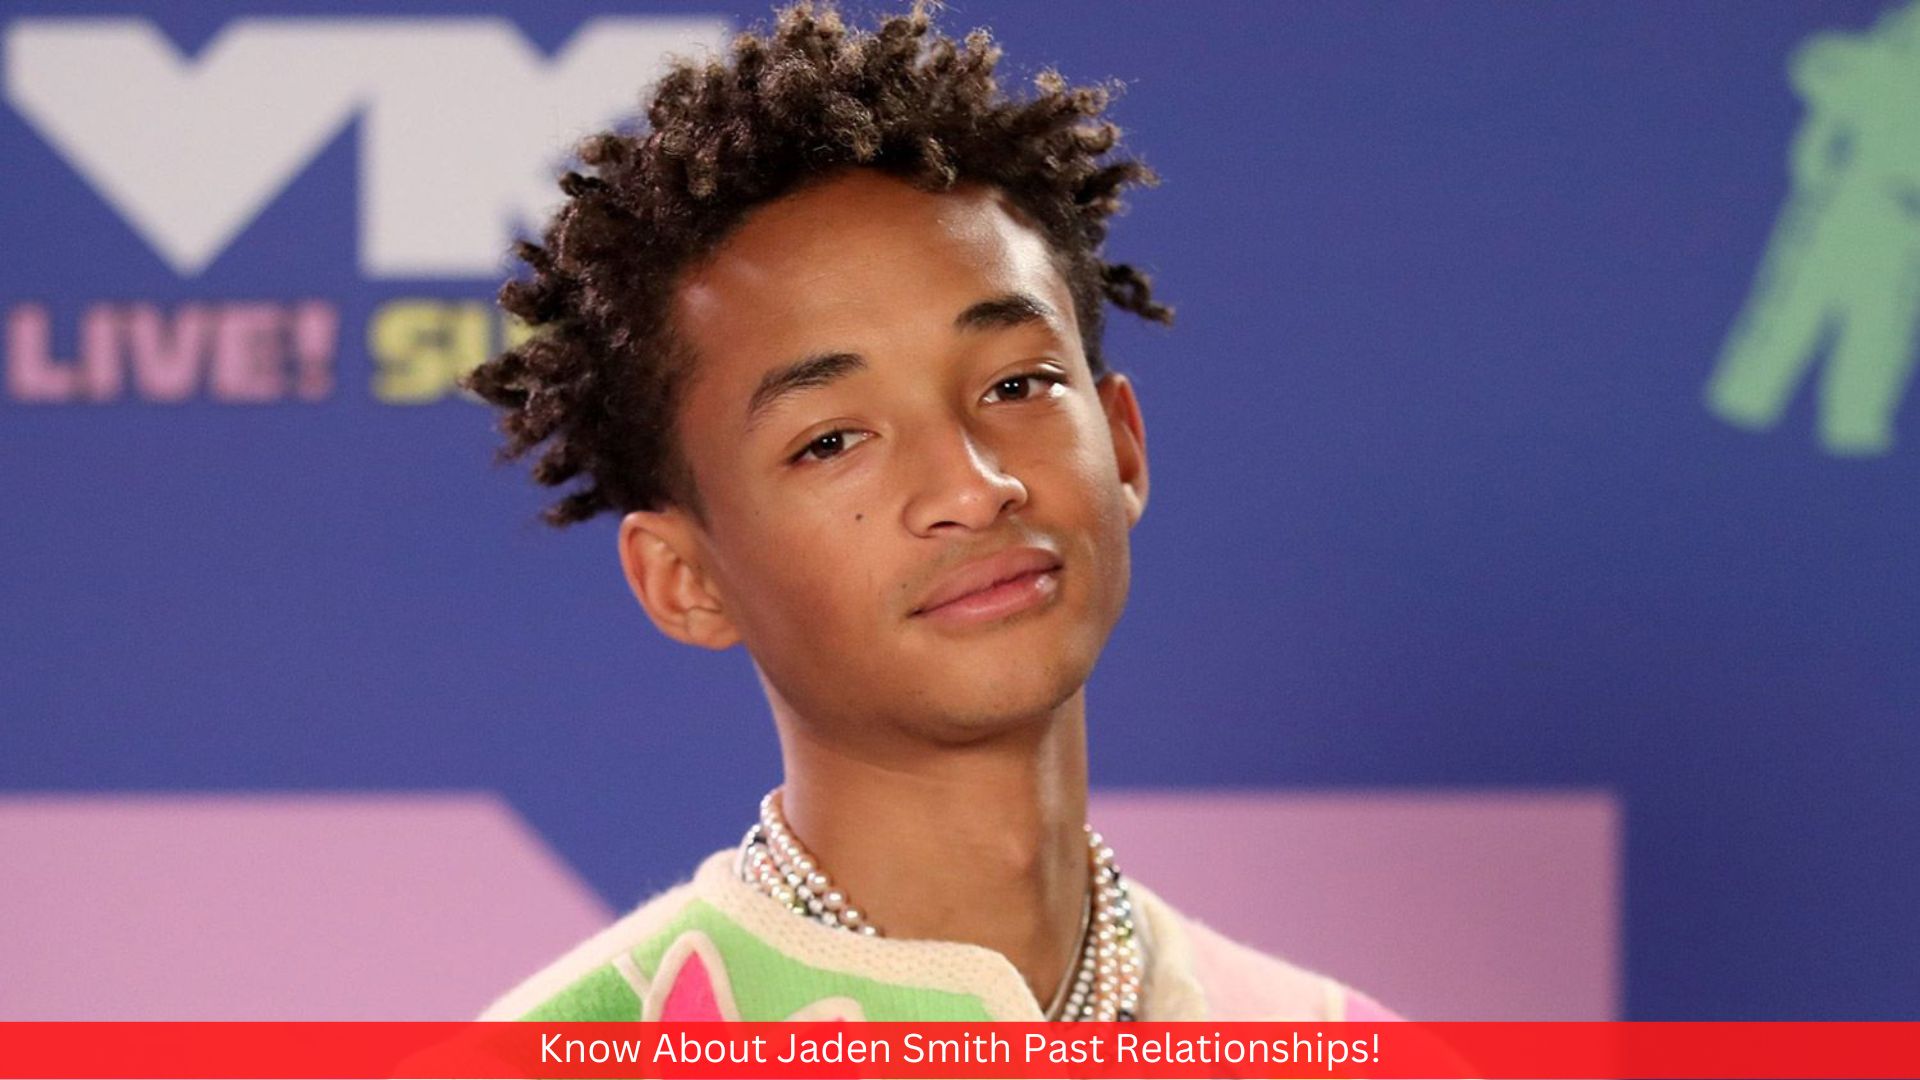 Know About Jaden Smith Past Relationships!